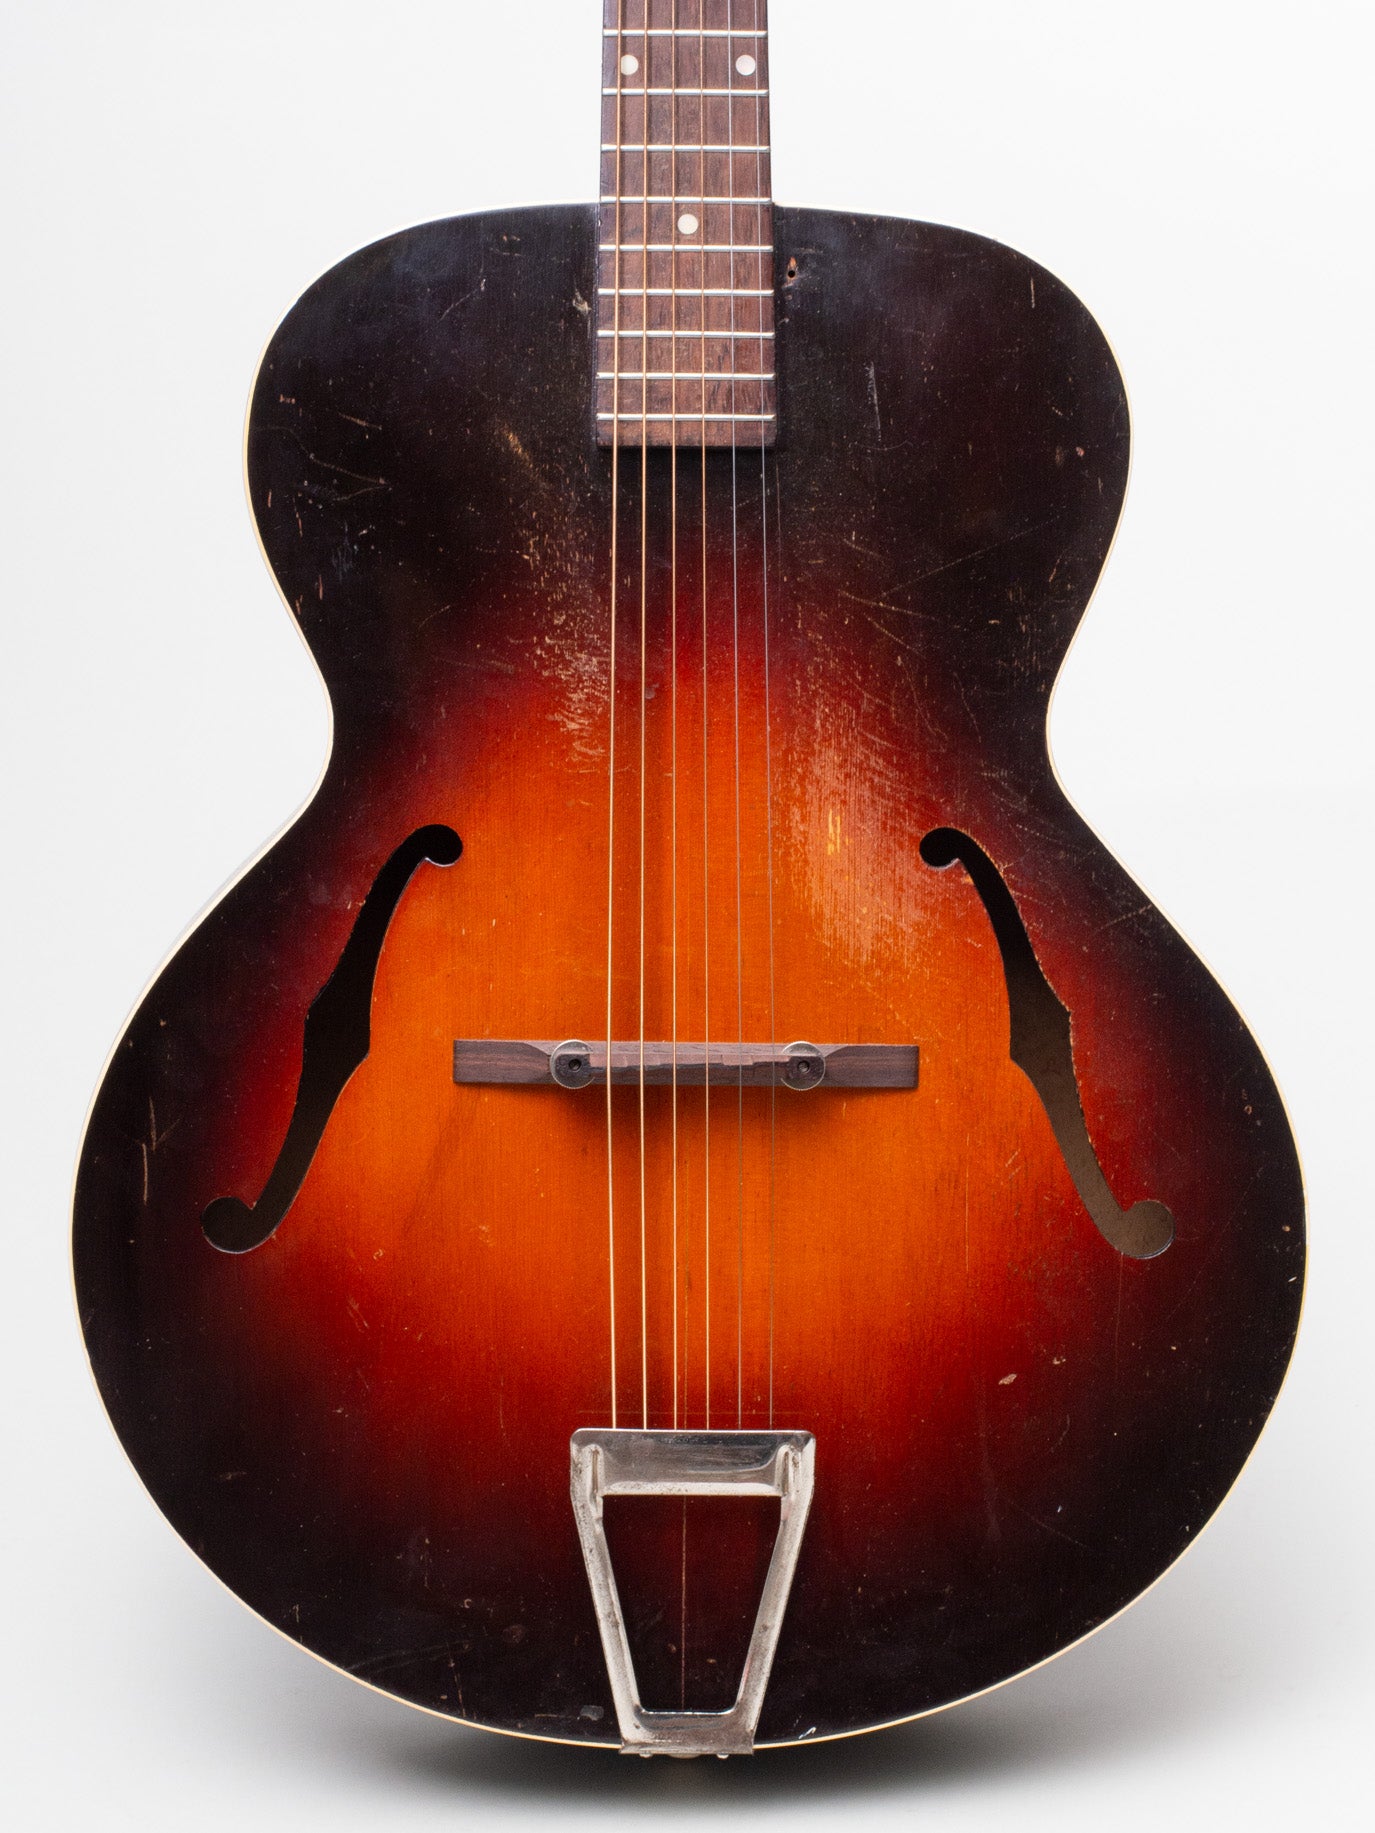 1943 Gibson L-50